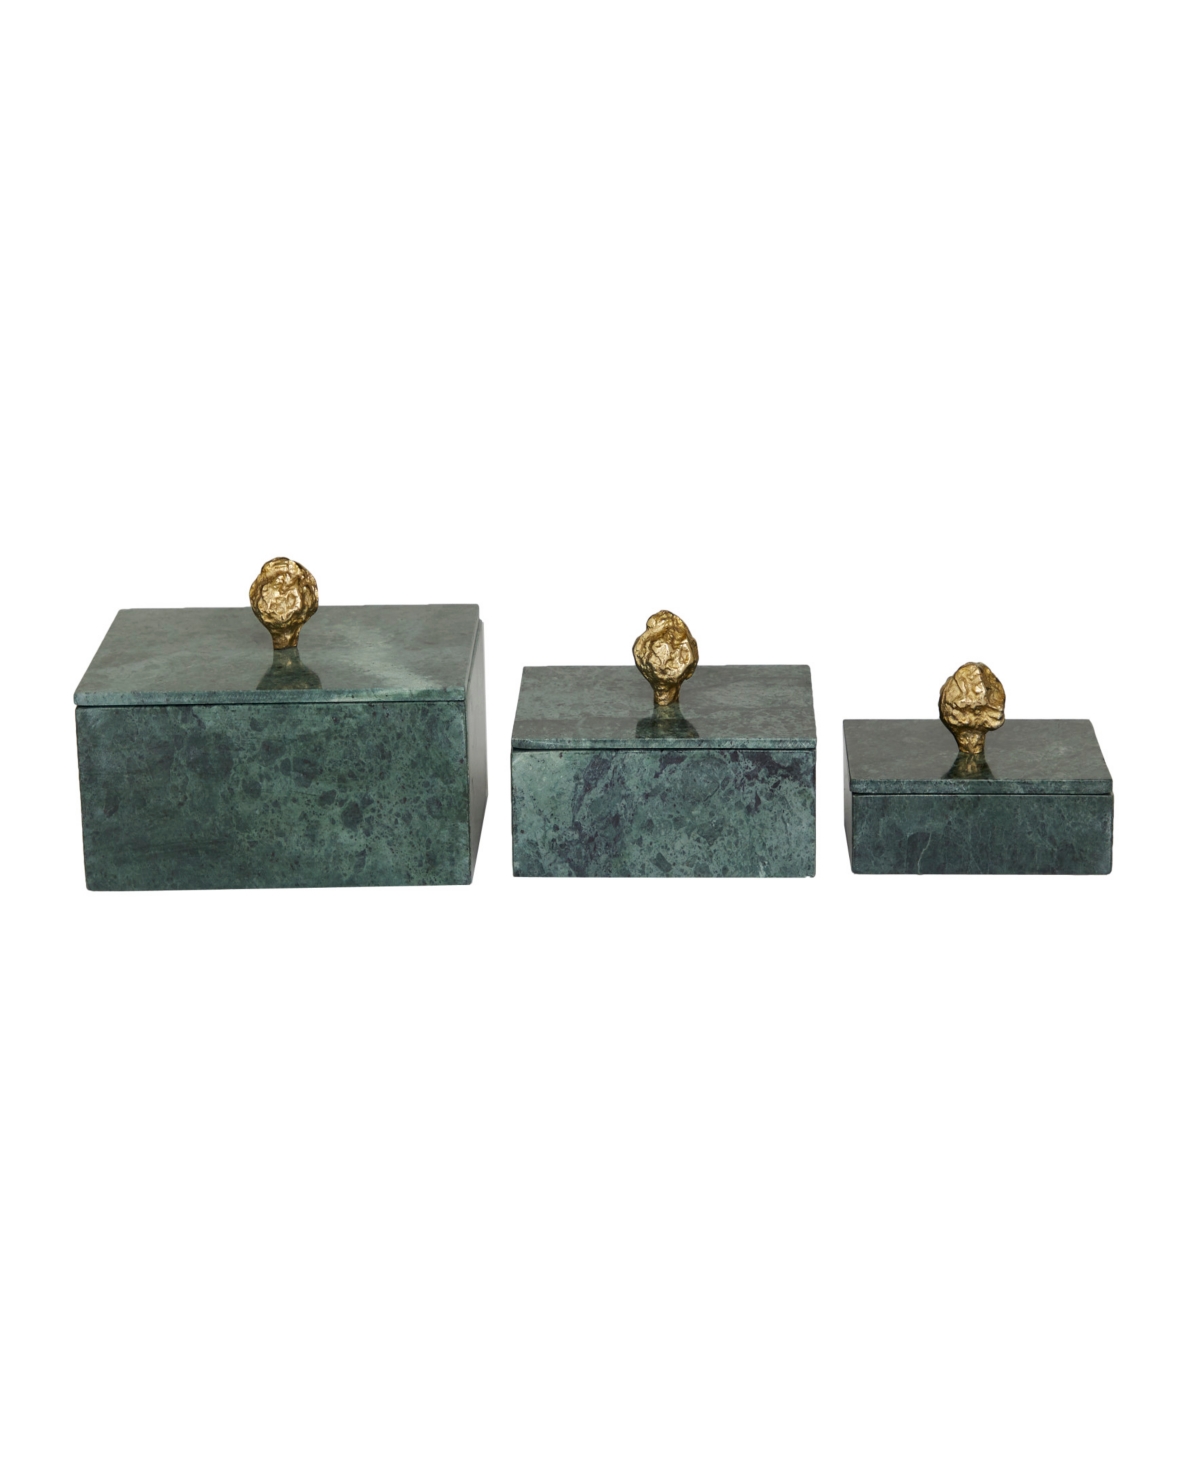 Rosemary Lane Real Marble Box With Gold-tone Final Set Of 3 In Green